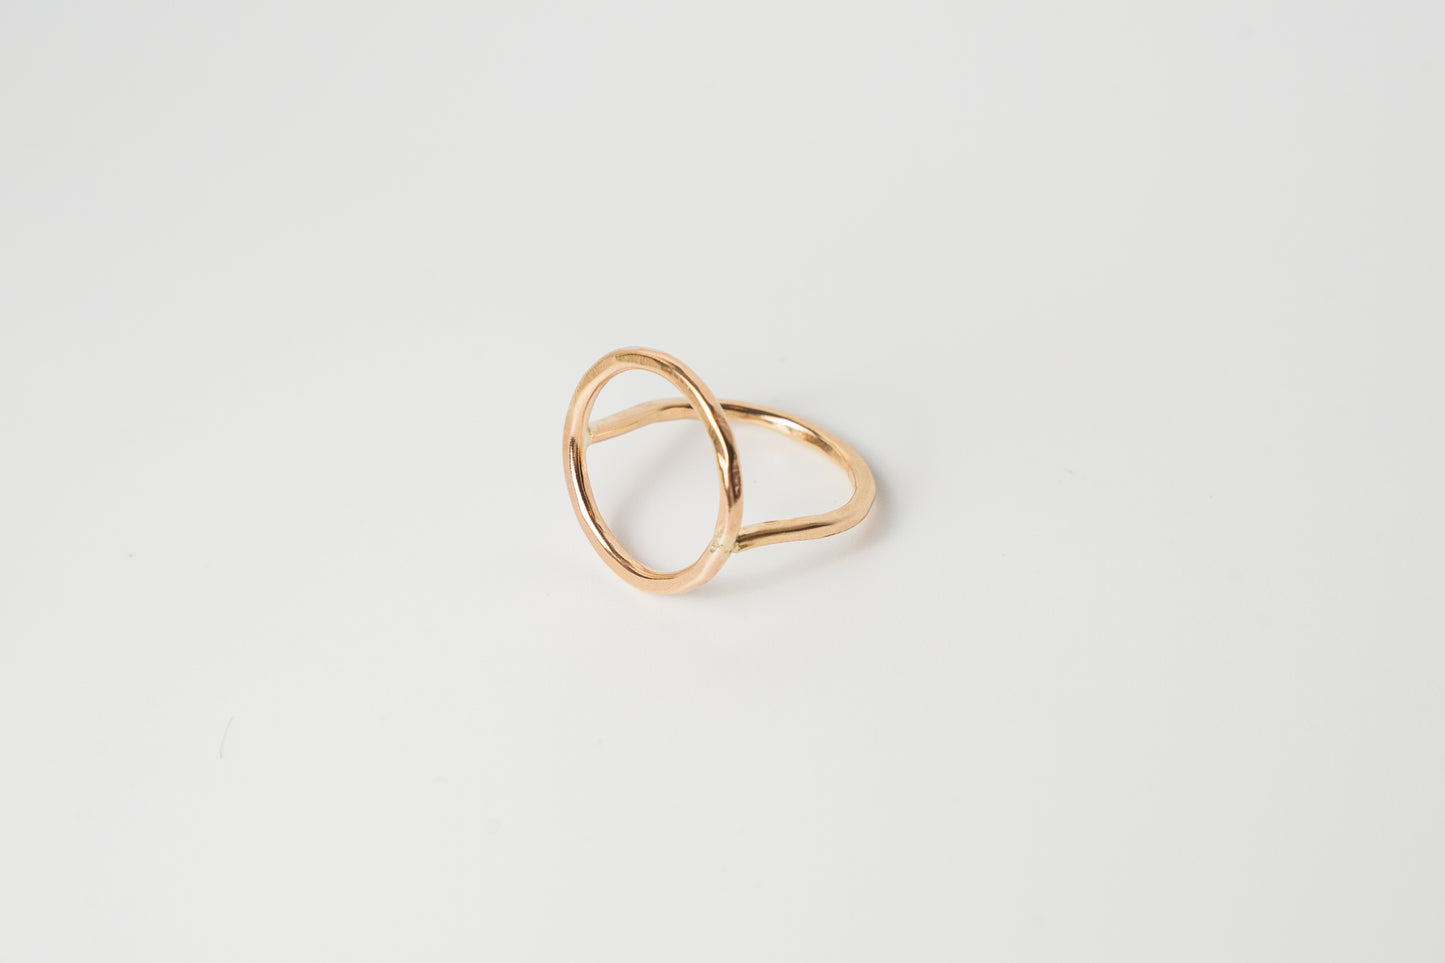 The Jackie "O" Ring